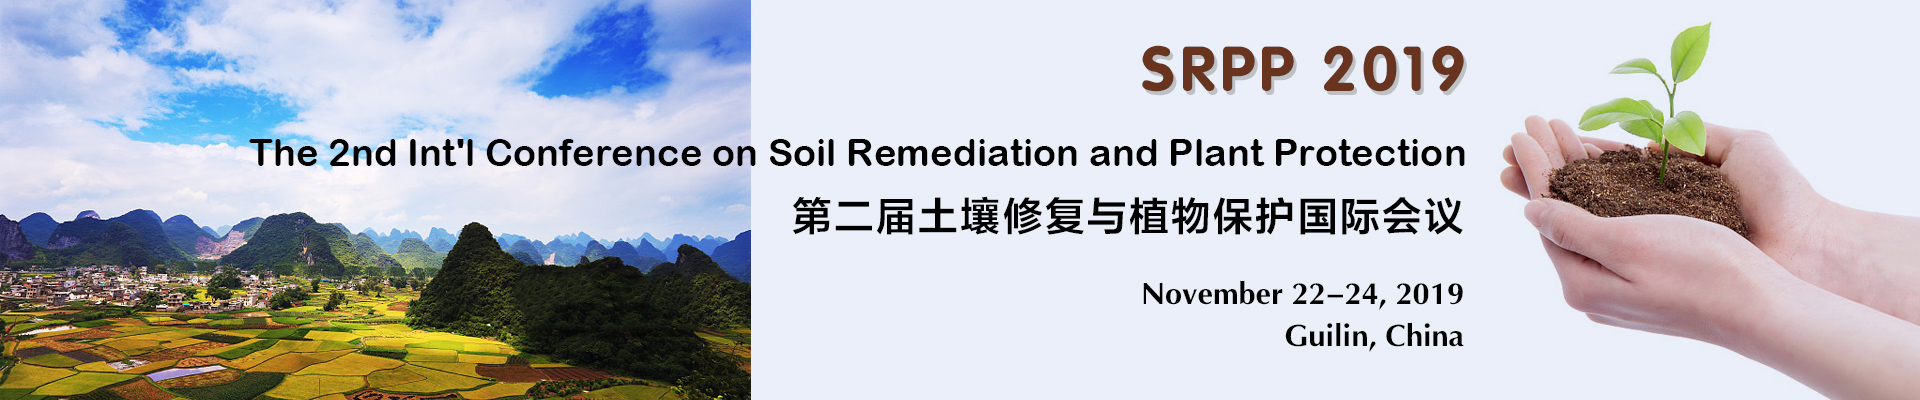 The 2nd Int'l Conference on Soil Remediation and Plant Protection (SRPP 2019)